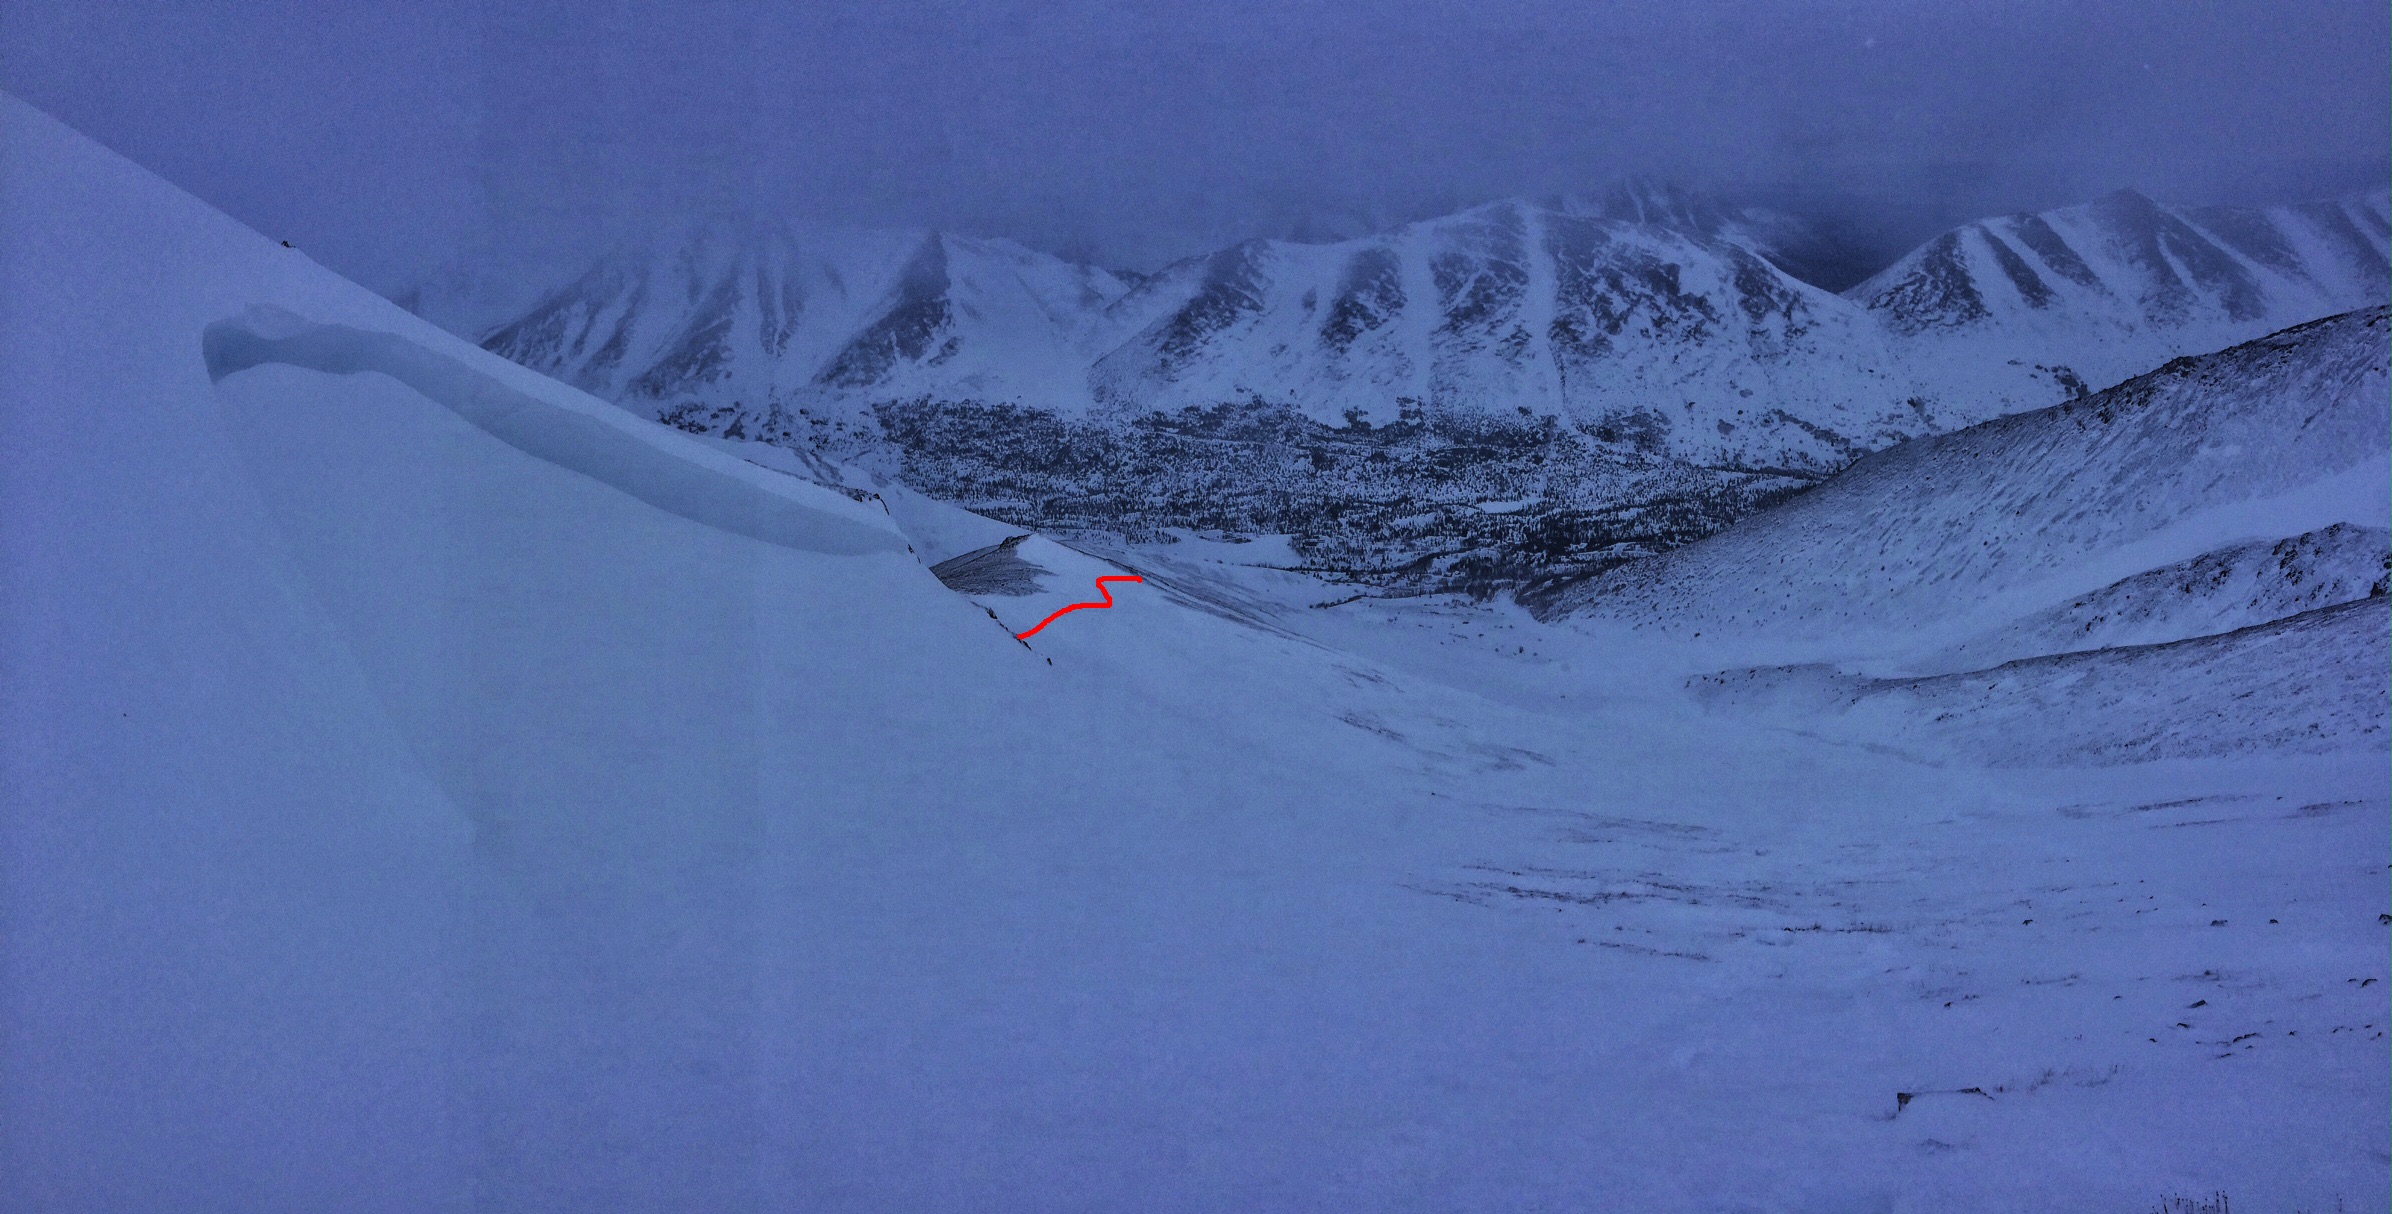 Avalanche crown and propagation in red. Debris down below where dog was buried. photo: aac